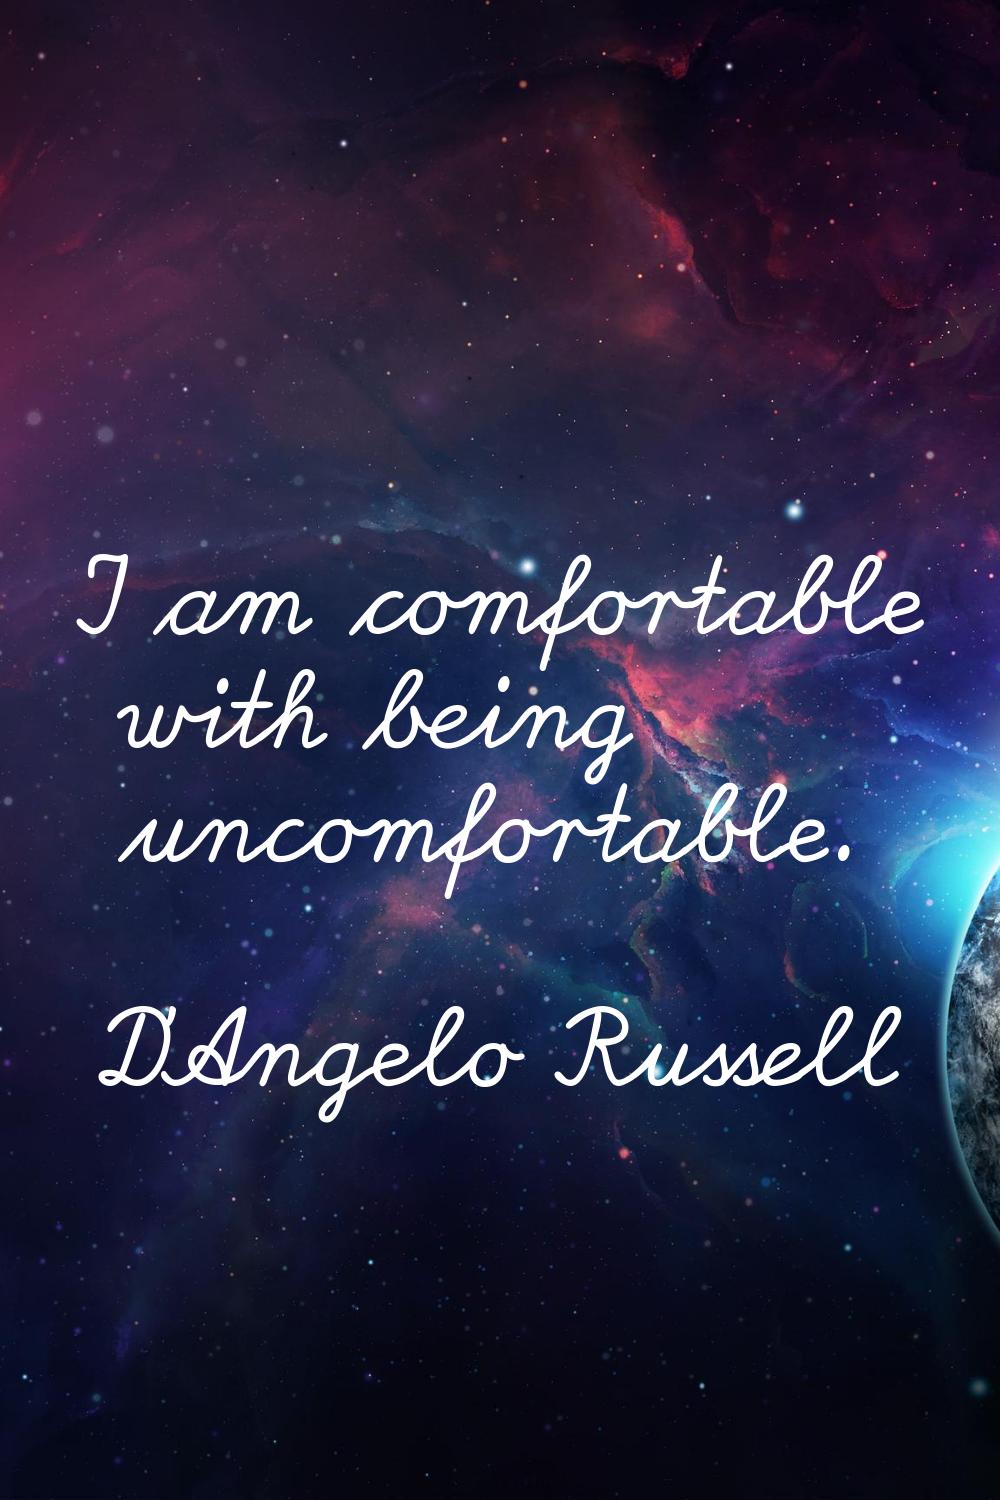 I am comfortable with being uncomfortable.